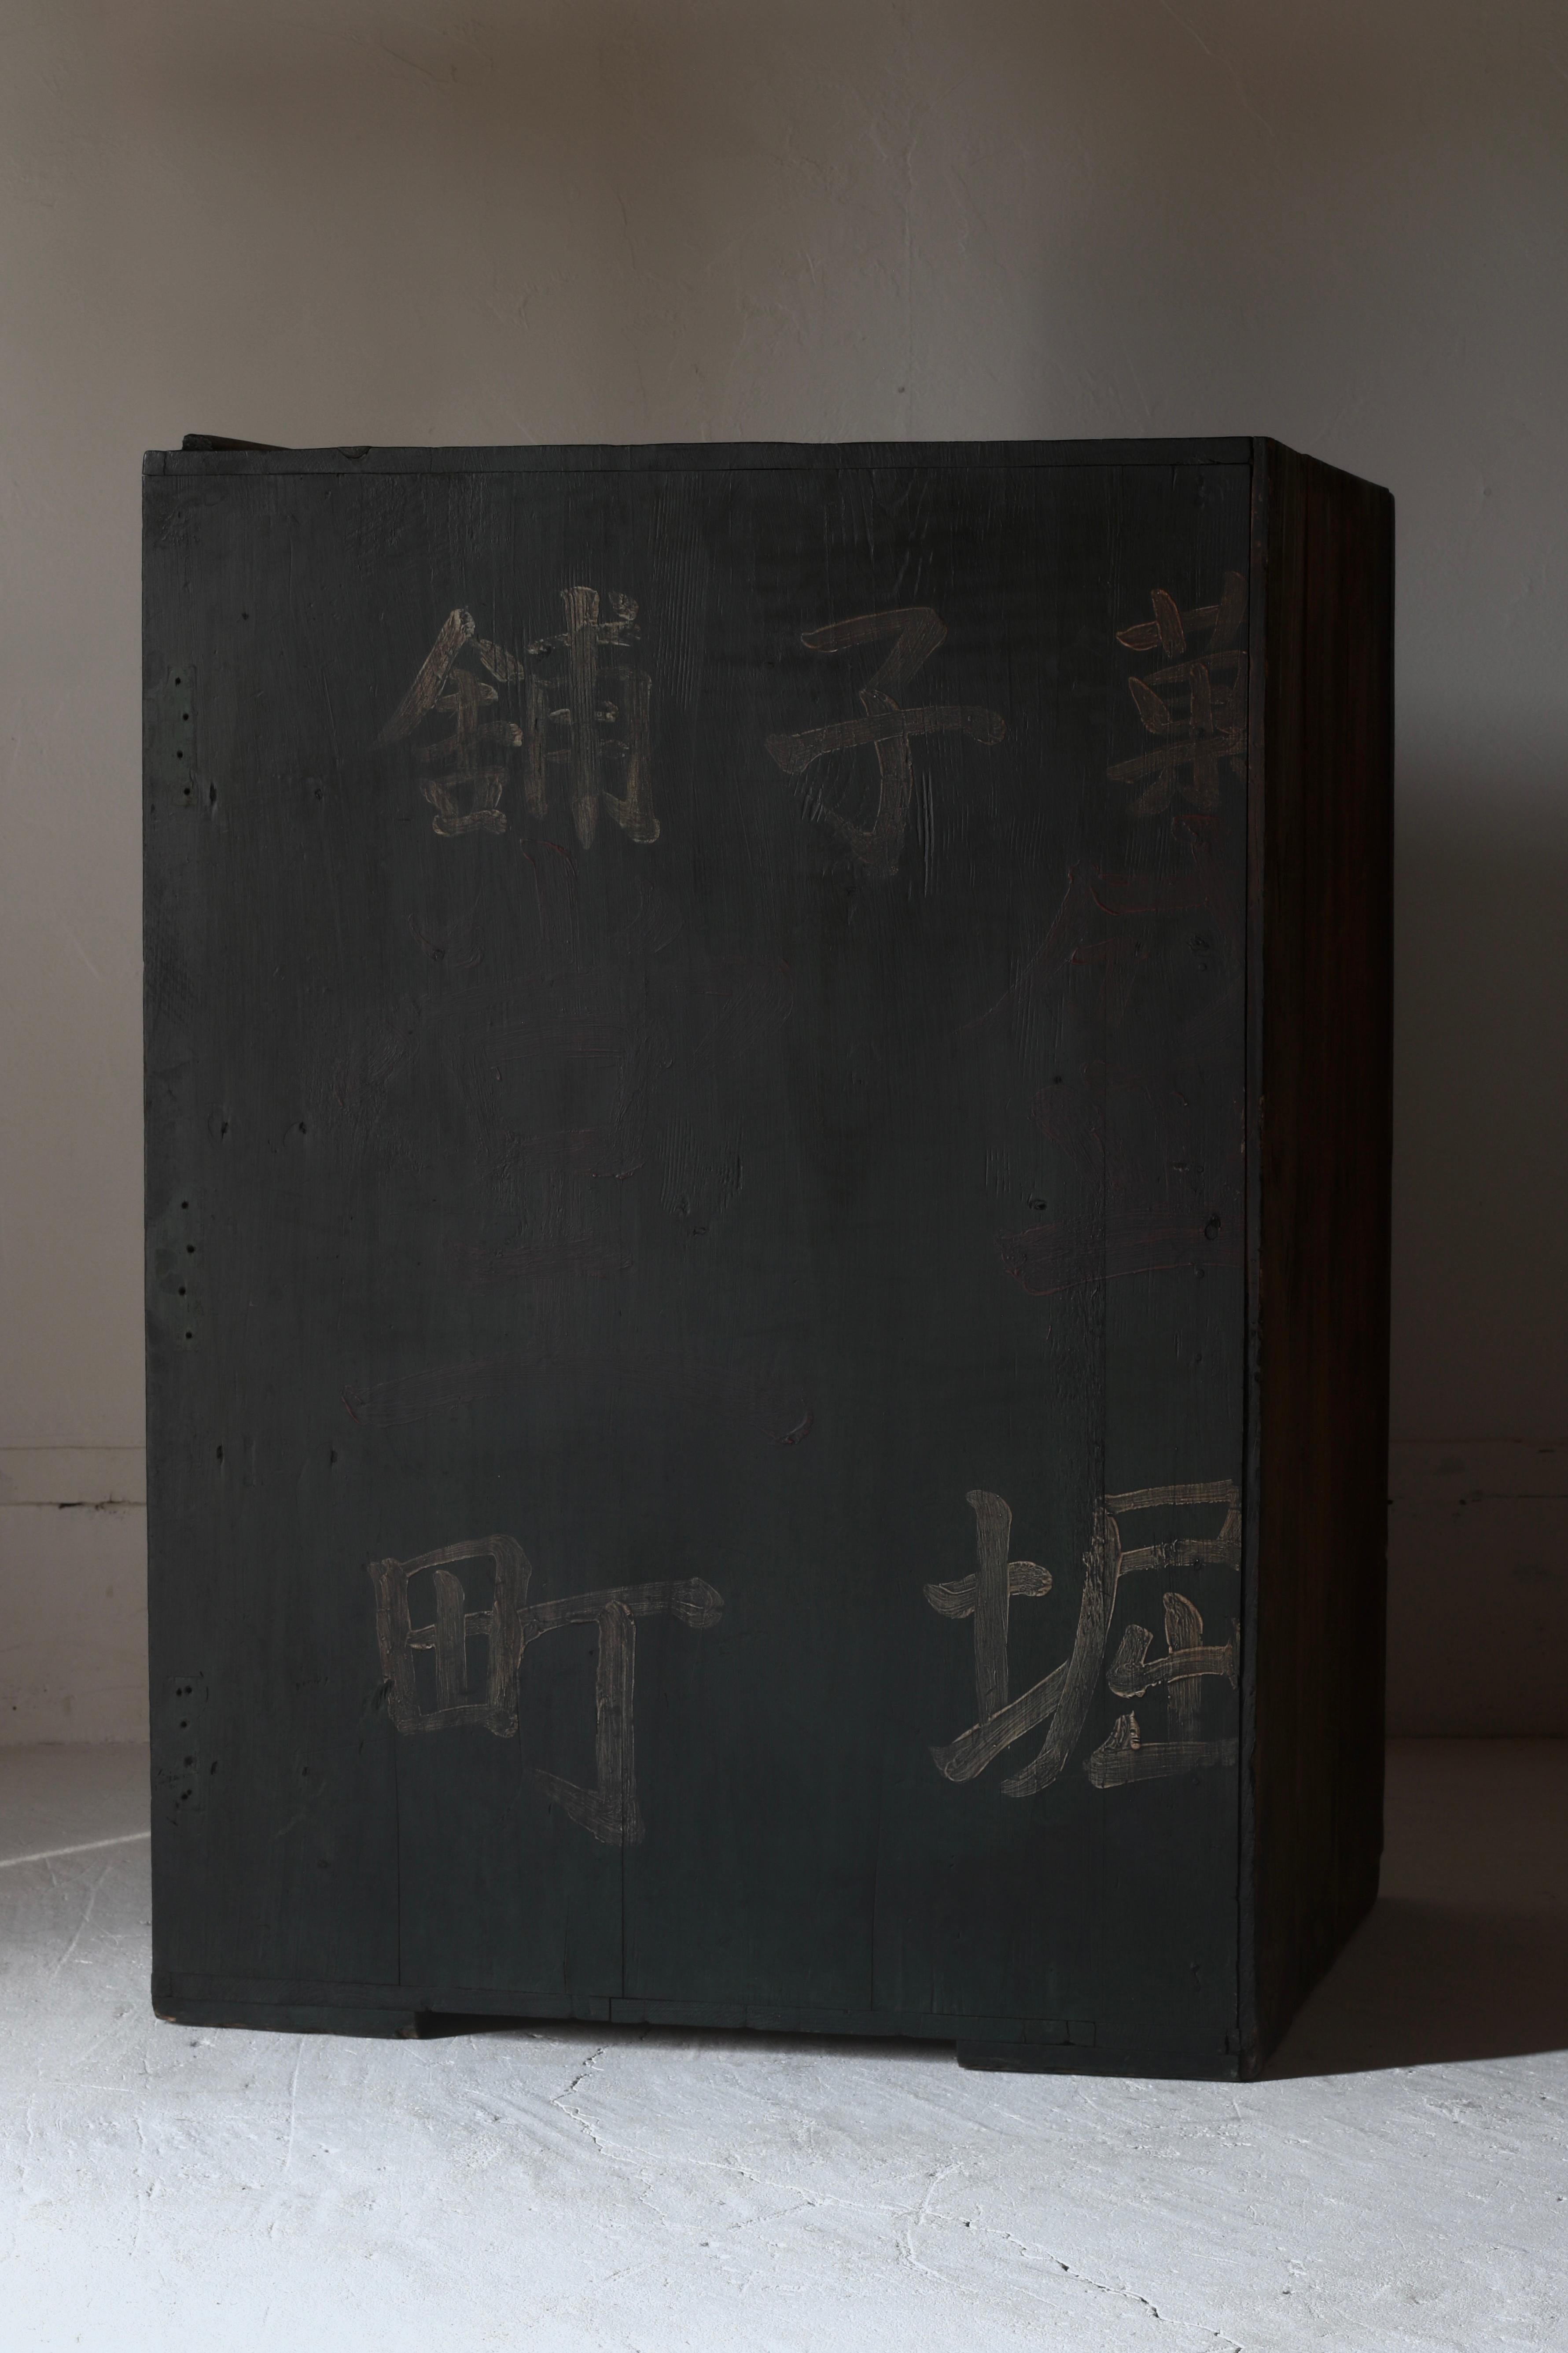 Japanese Antique Black Tansu / Chest of drawers Cabinet / 1912s-1926s WabiSabi In Good Condition For Sale In Iwate-gun Shizukuishi-cho, Iwate Prefecture